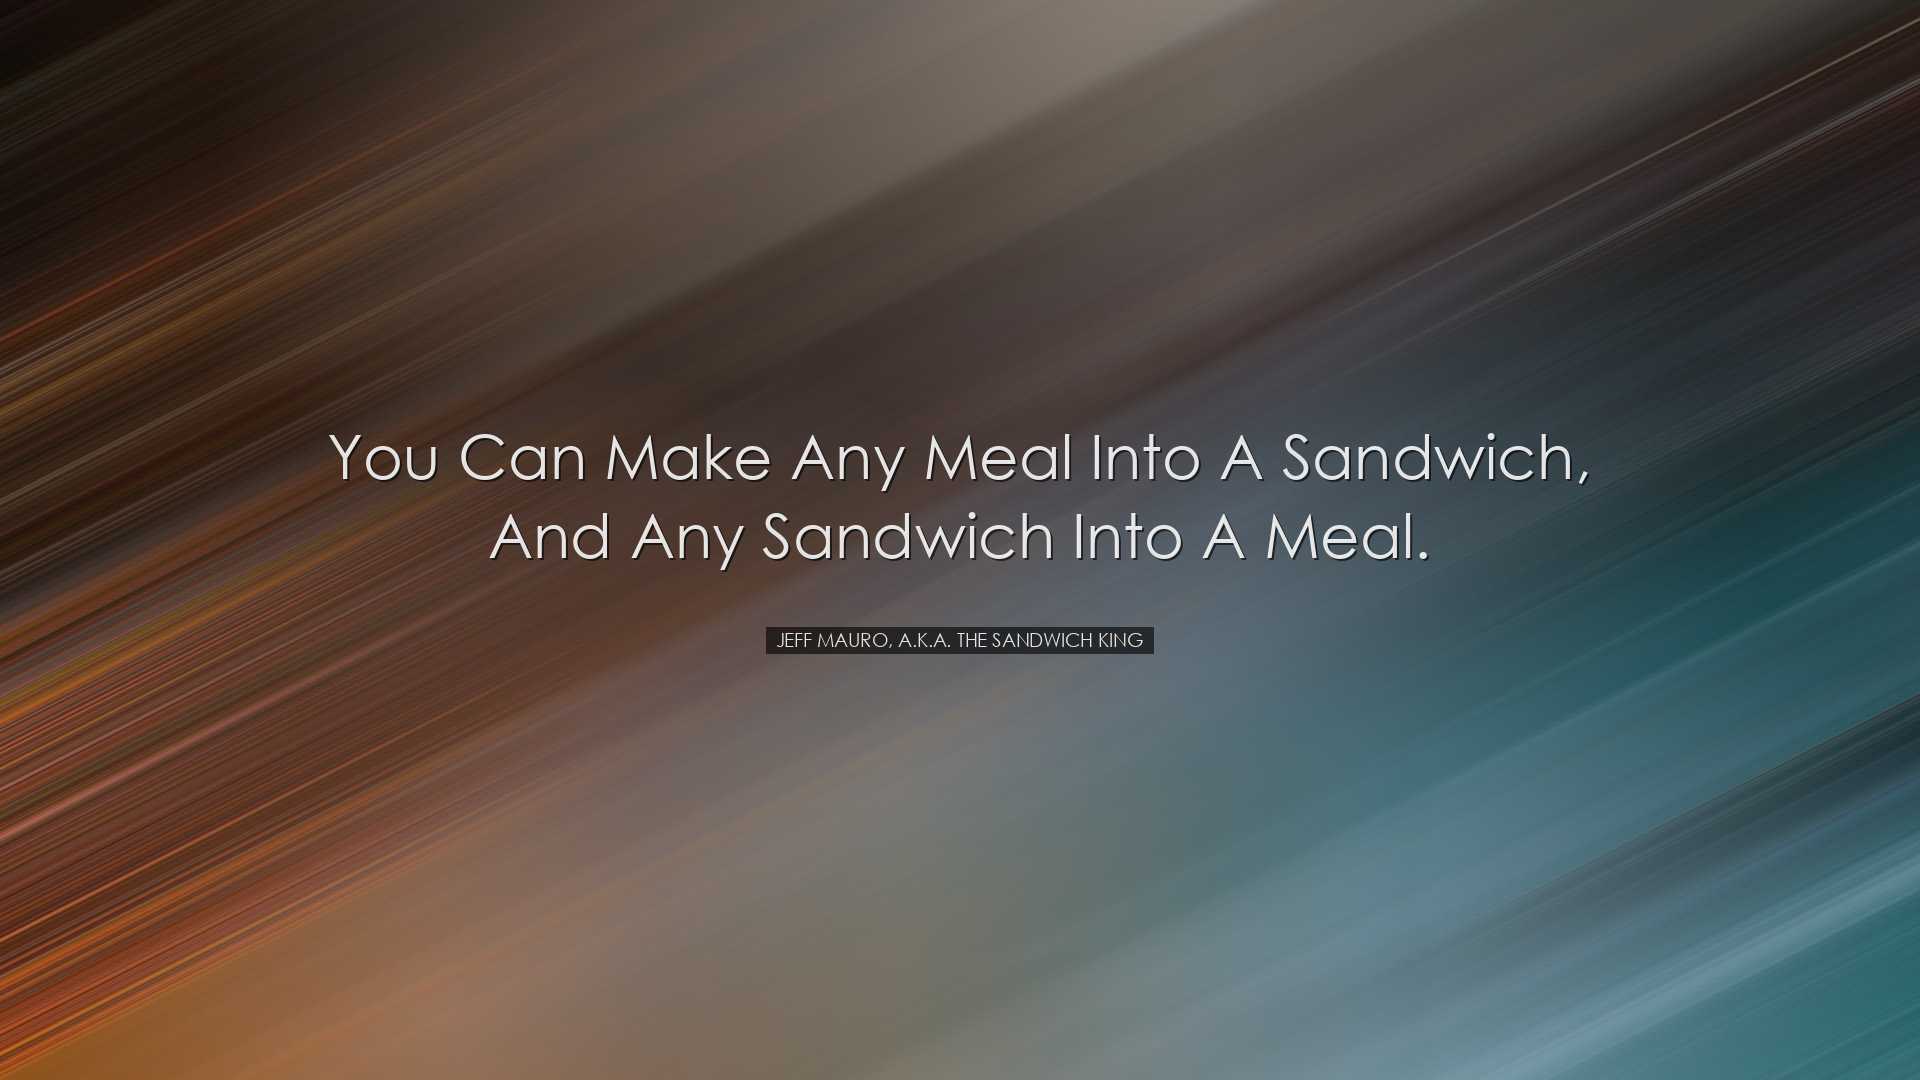 You can make any meal into a sandwich, and any sandwich into a mea